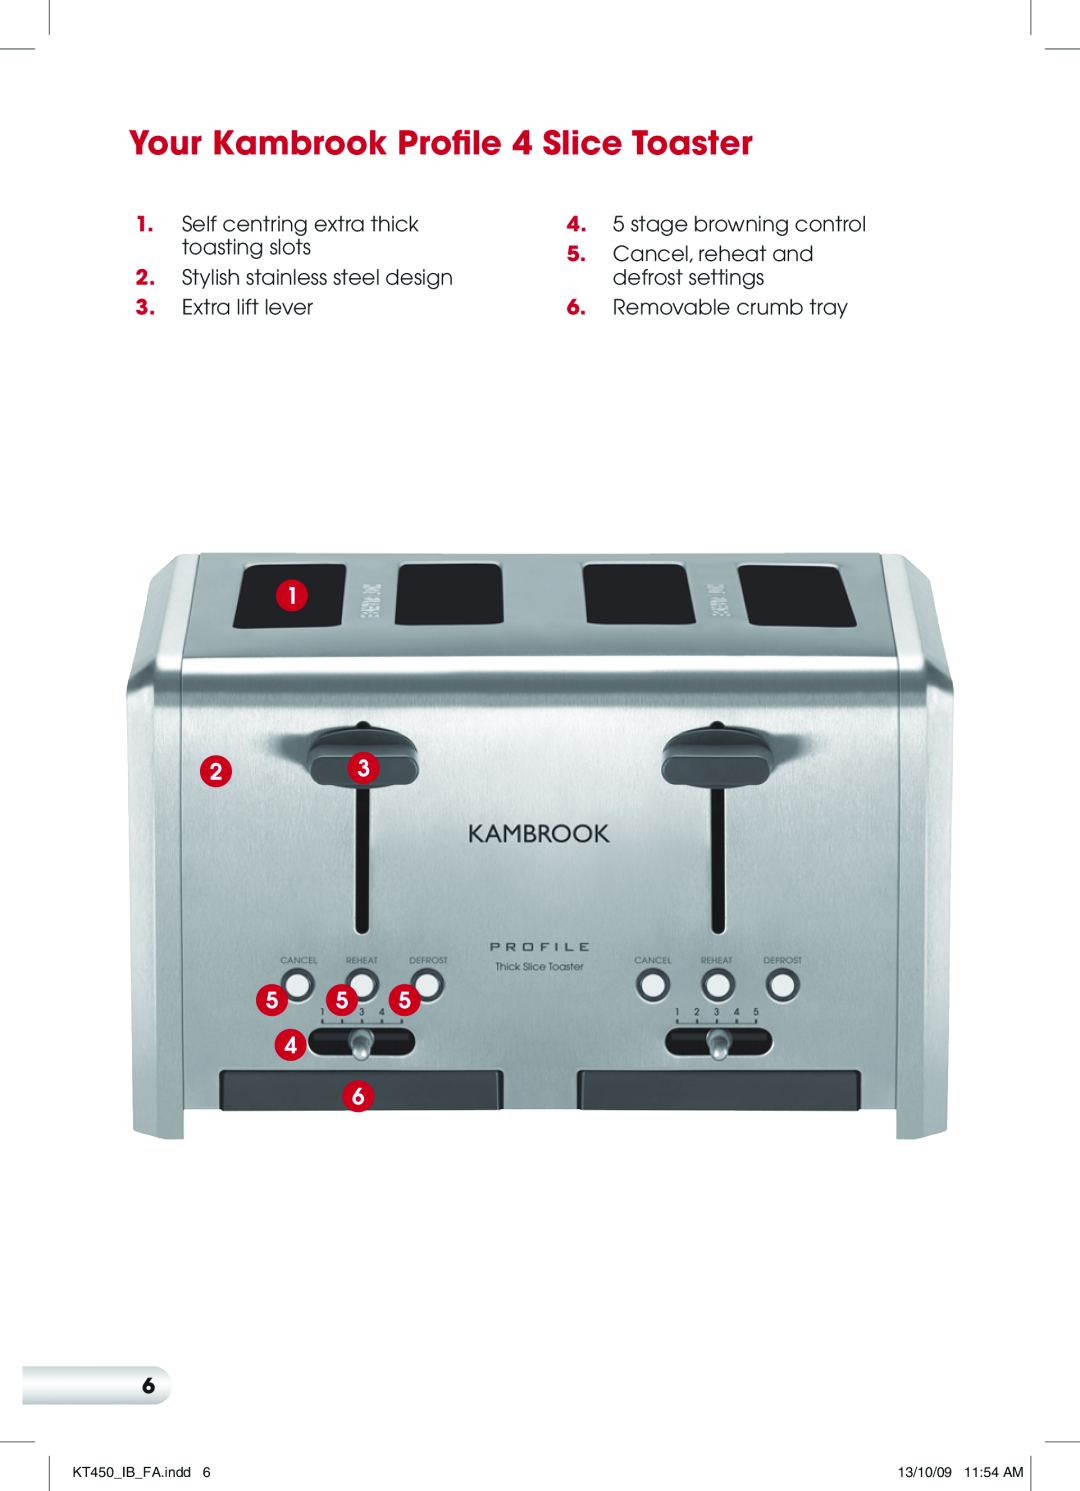 Kambrook KT450 Your Kambrook Profile 4 Slice Toaster, Self centring extra thick, stage browning control, toasting slots 